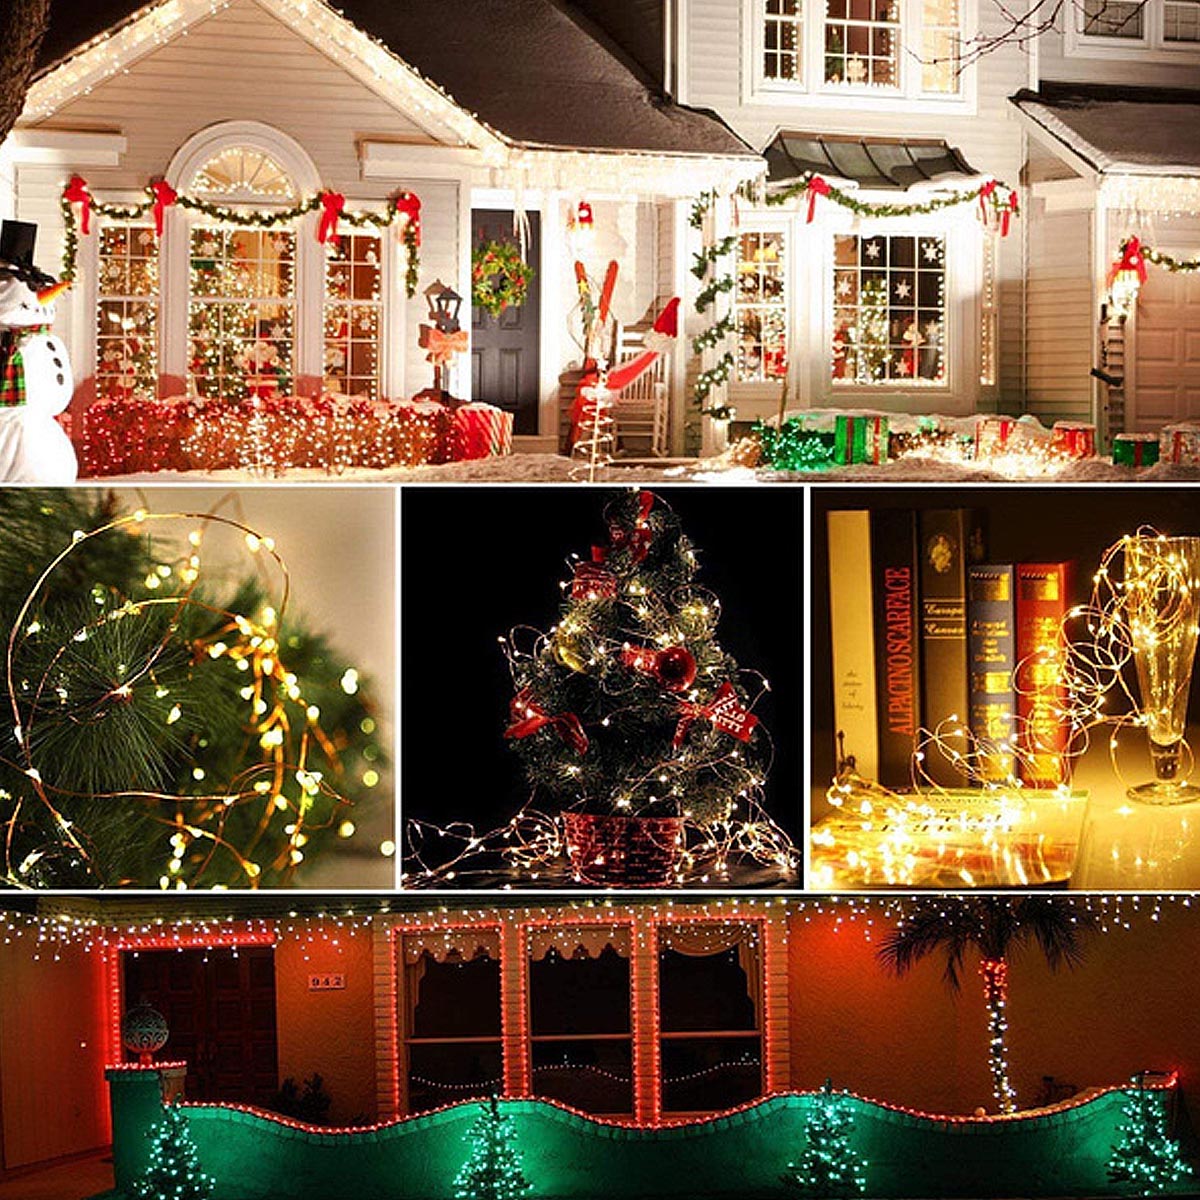 510M-LED-Lights-Christmas-Fairy-String-Lights-Christmas-Party-w-Remote-Control-1794627-4